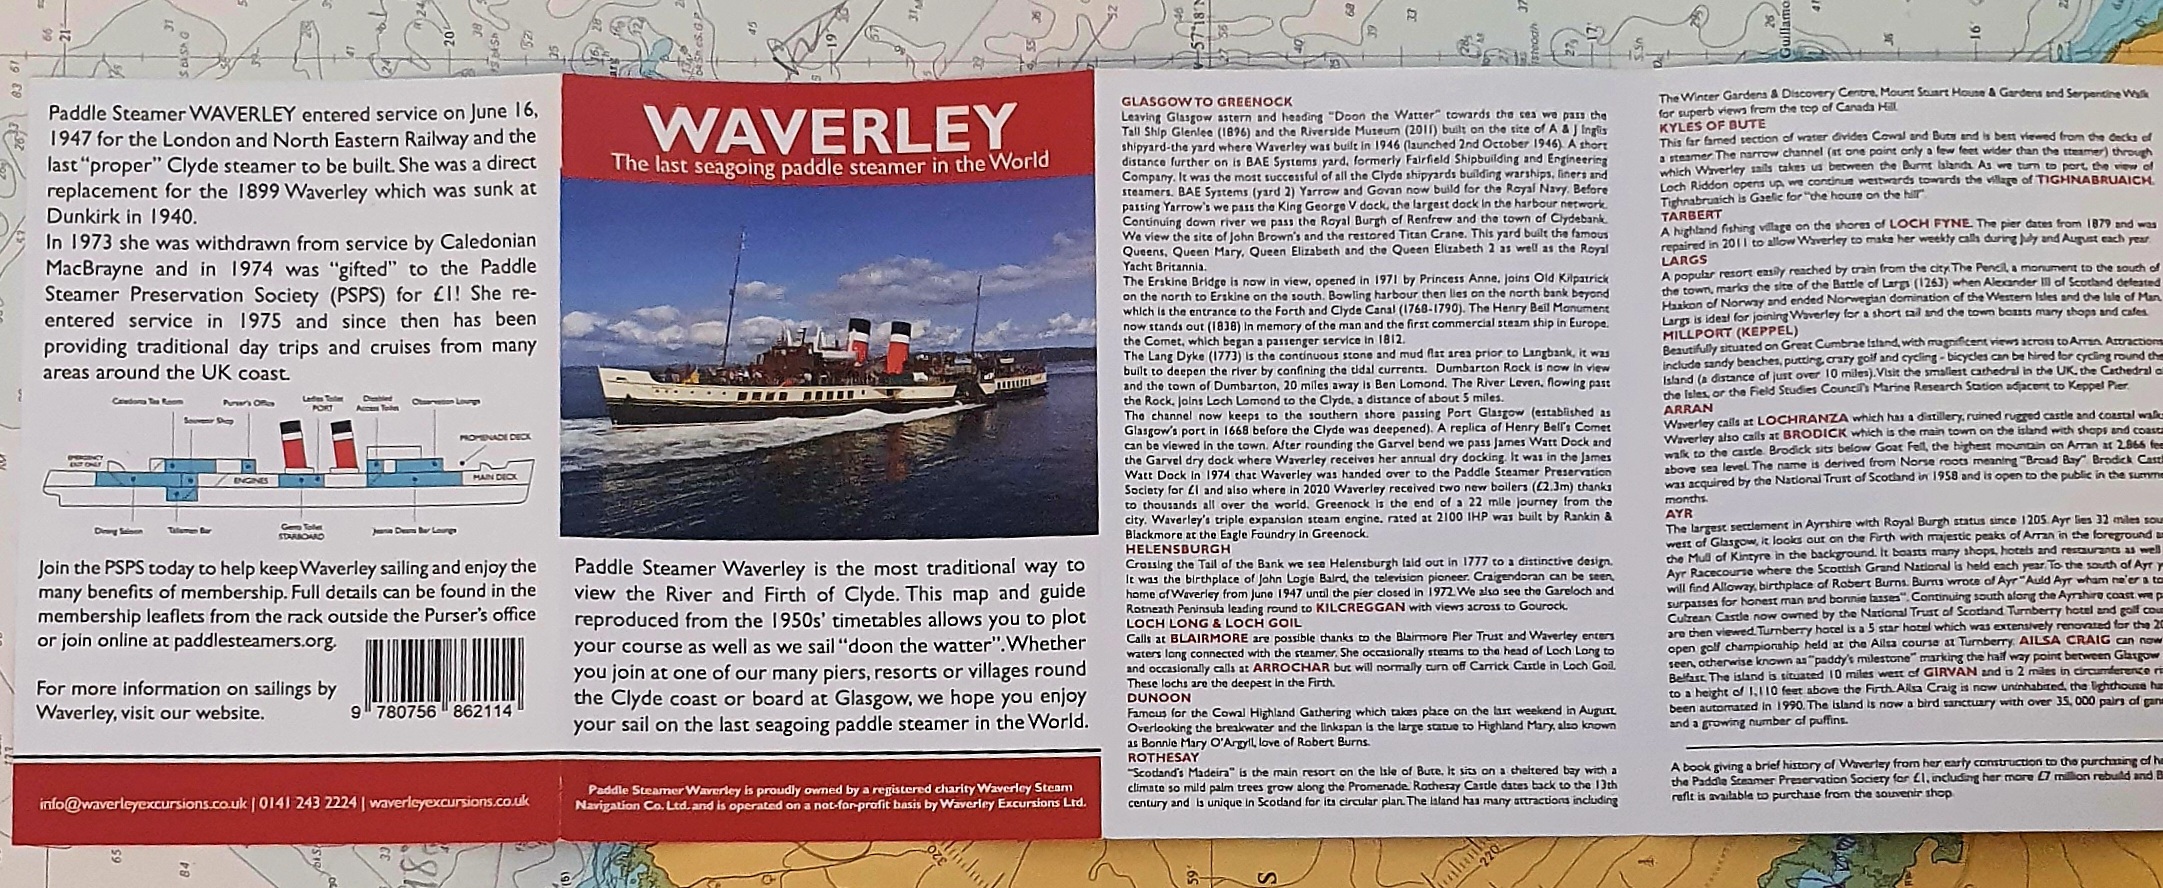 waverley trips on the clyde